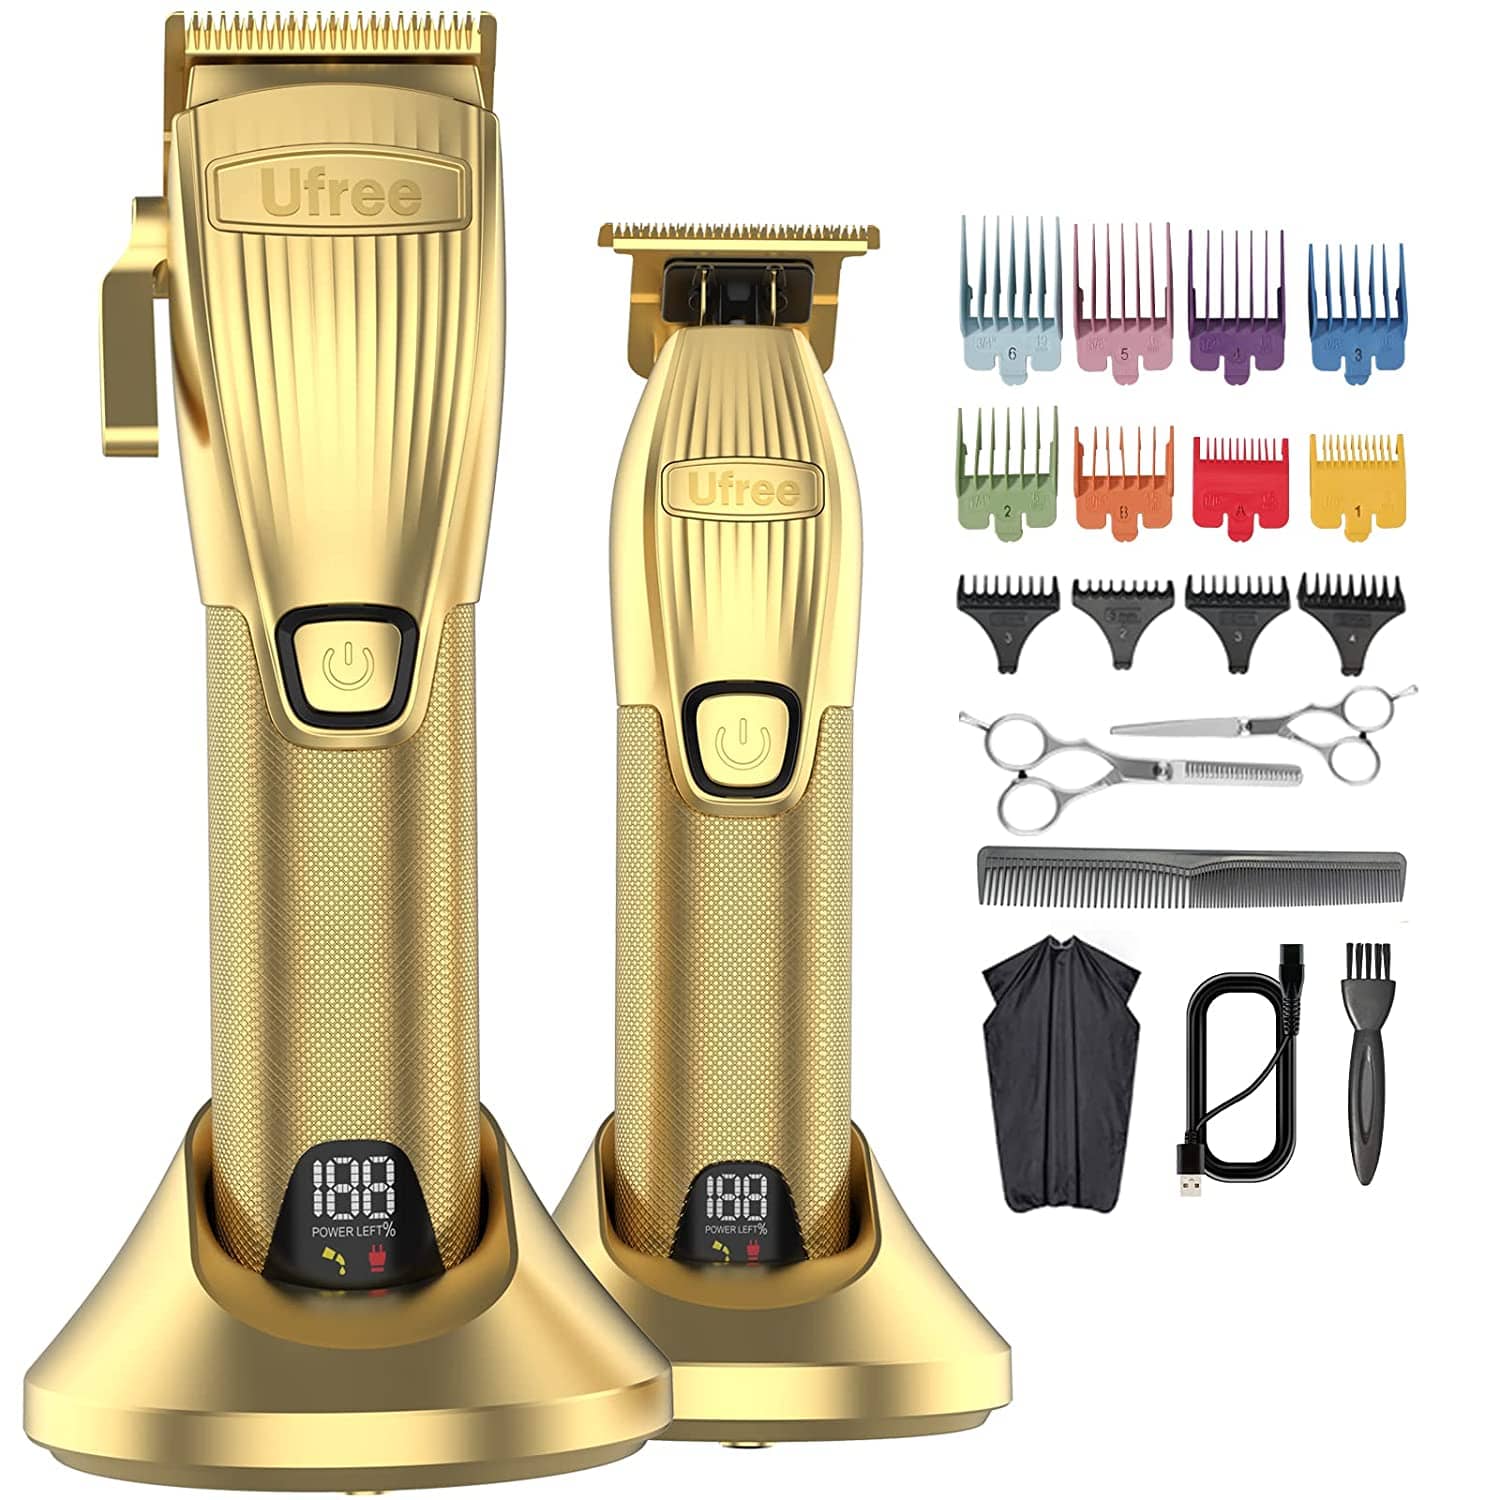 Ufree Hair Clippers and Hair Trimmer Set Best Hair Clippers For Every Type Of Trim And Haircut